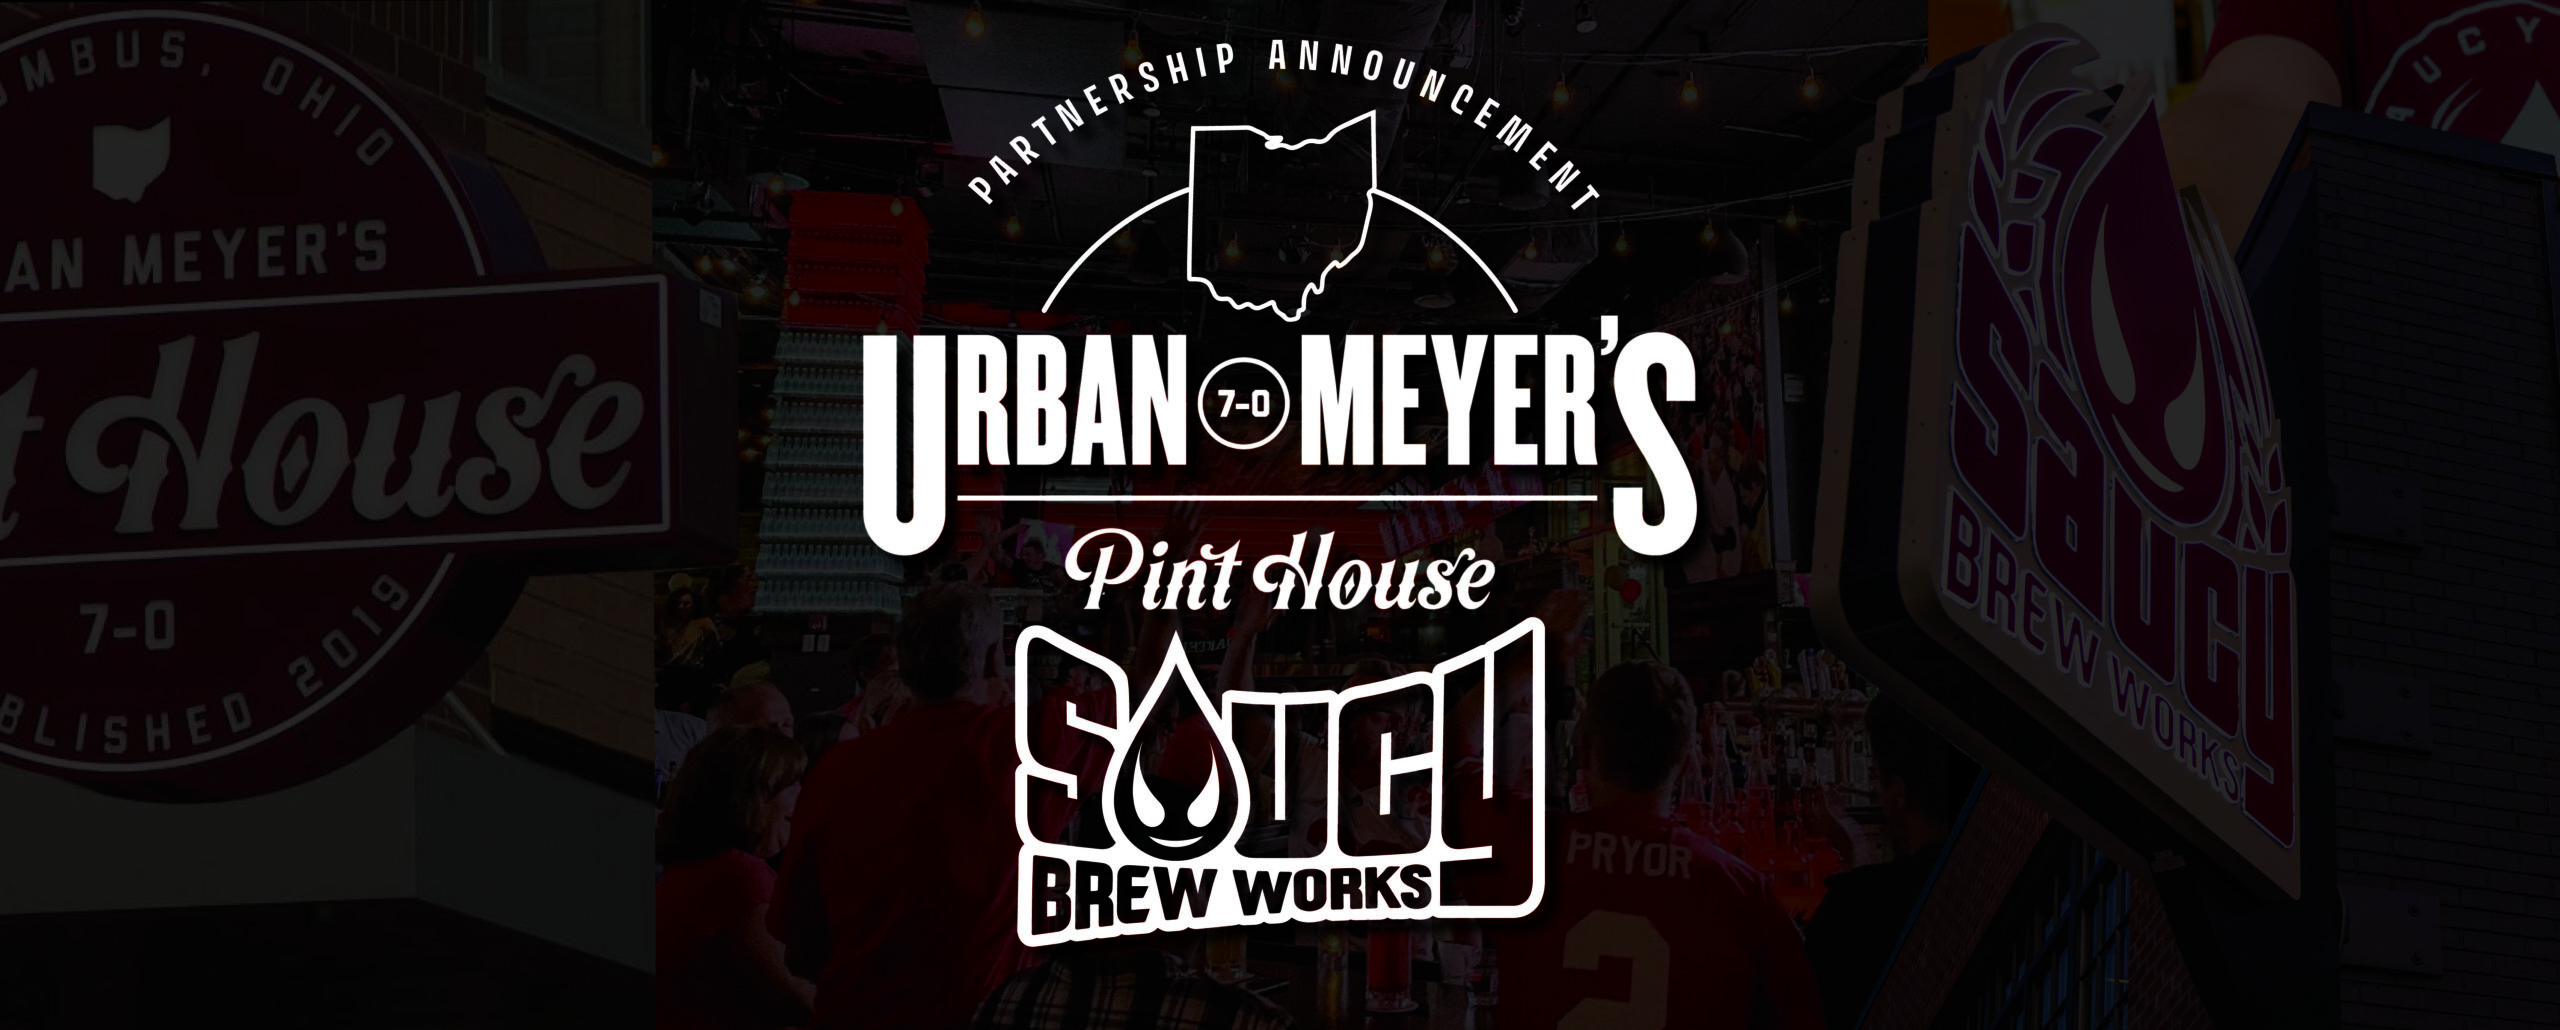 Partnership Announcement. Urban Meyer's Pint House and Spicy Brew Works.